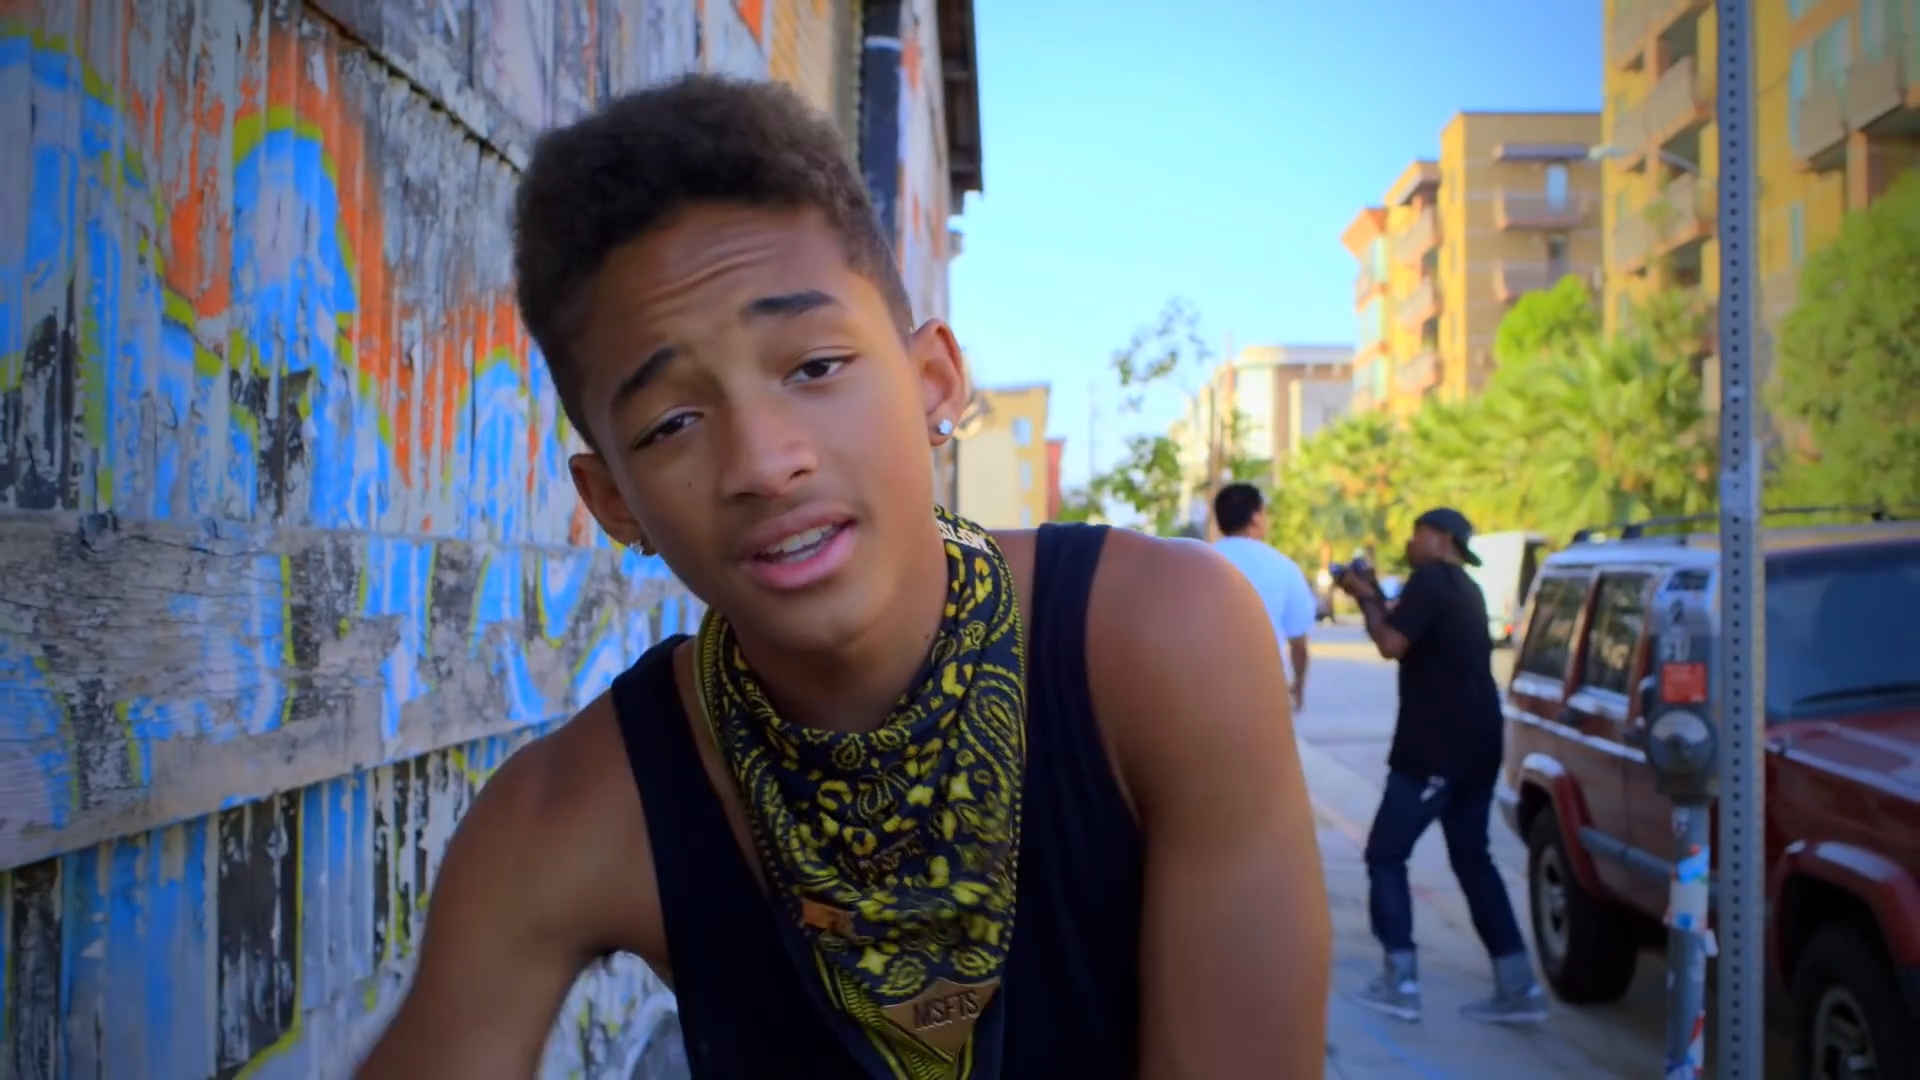 Picture Of Jaden Smith In Music Video The Coolest Jaden Smith 1643333170 Teen Idols 4 You 6810